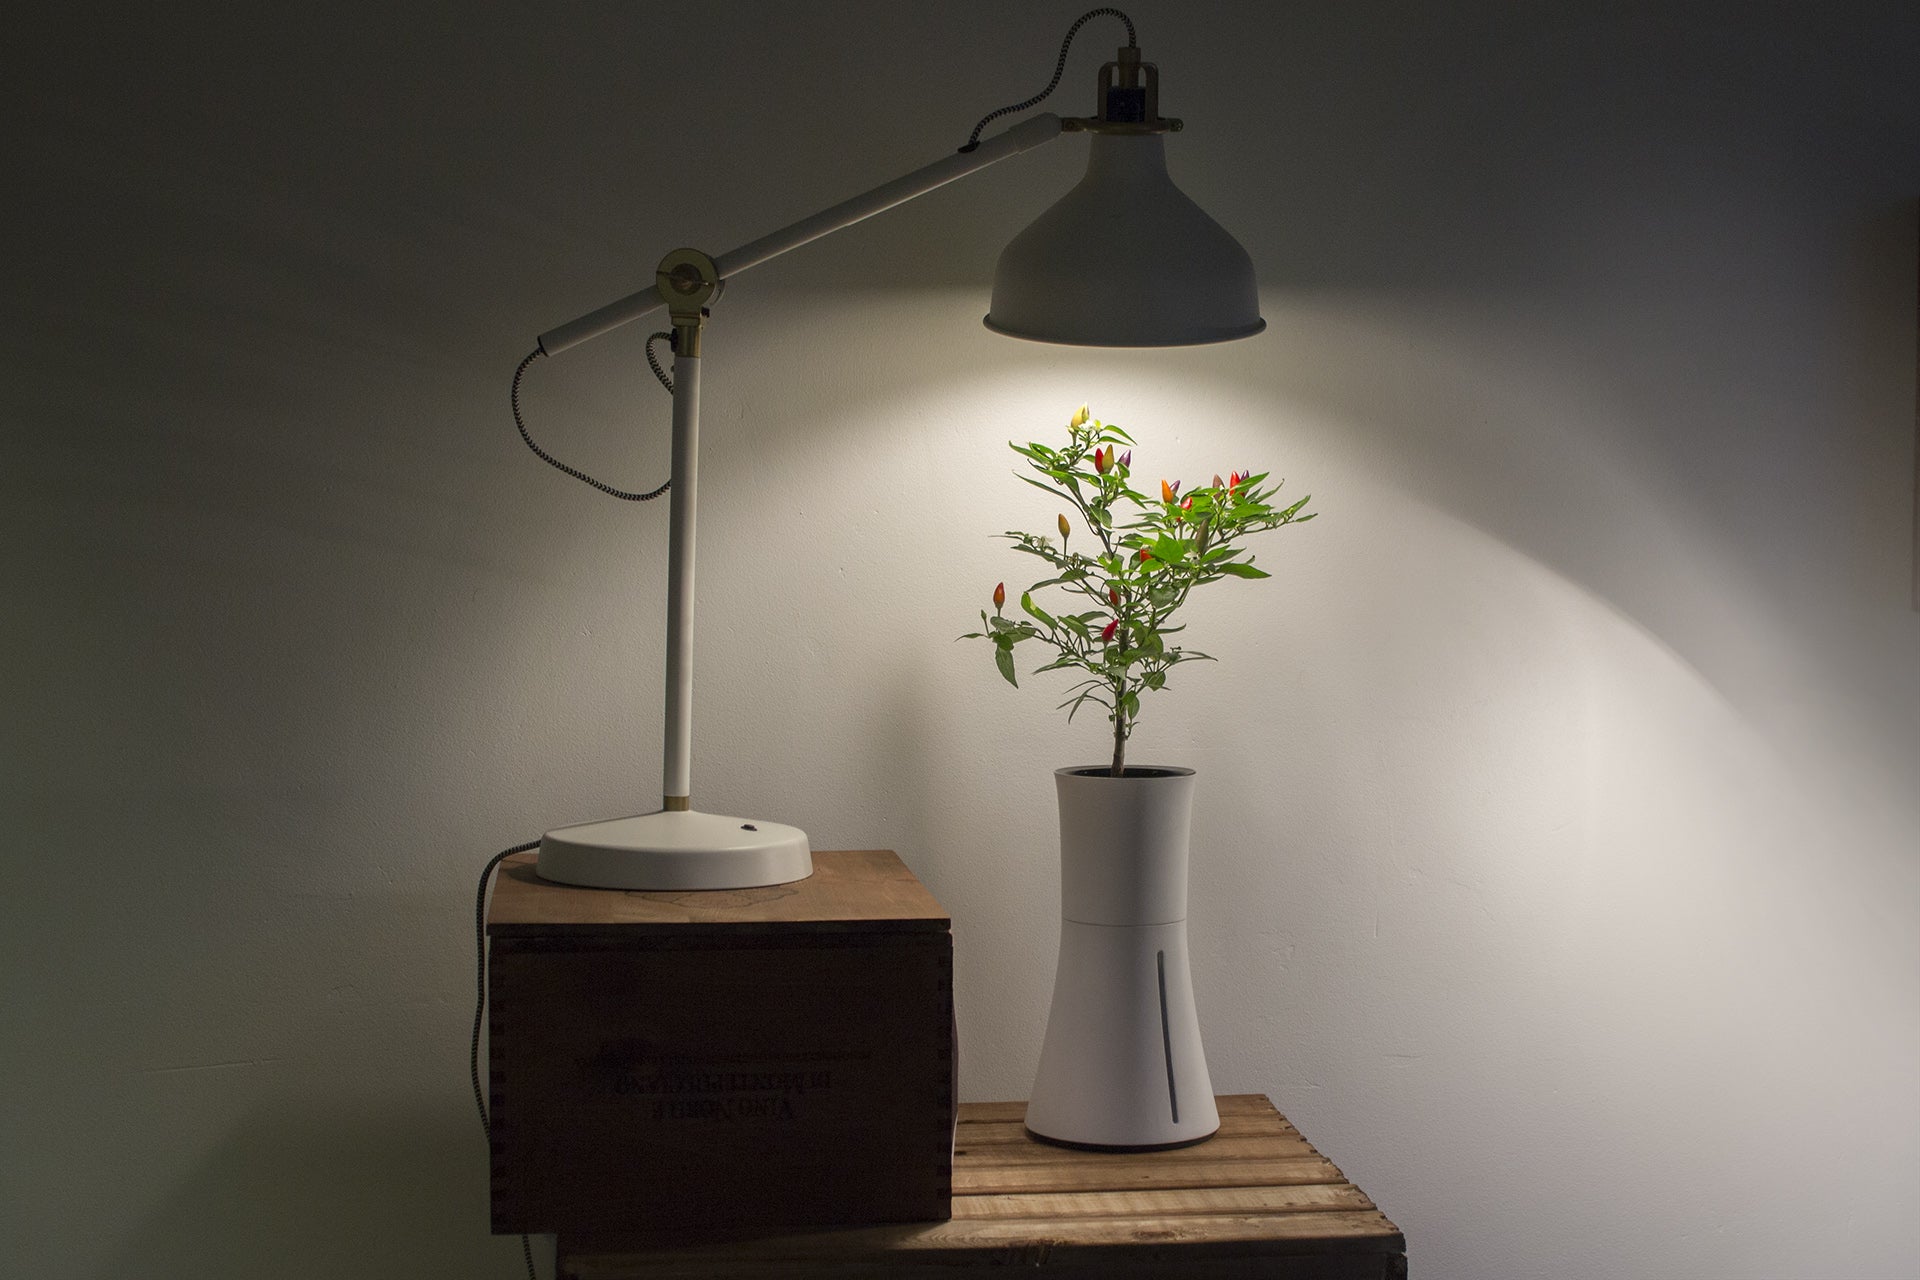 Do Grow Lights Work? Everything You Need to Know